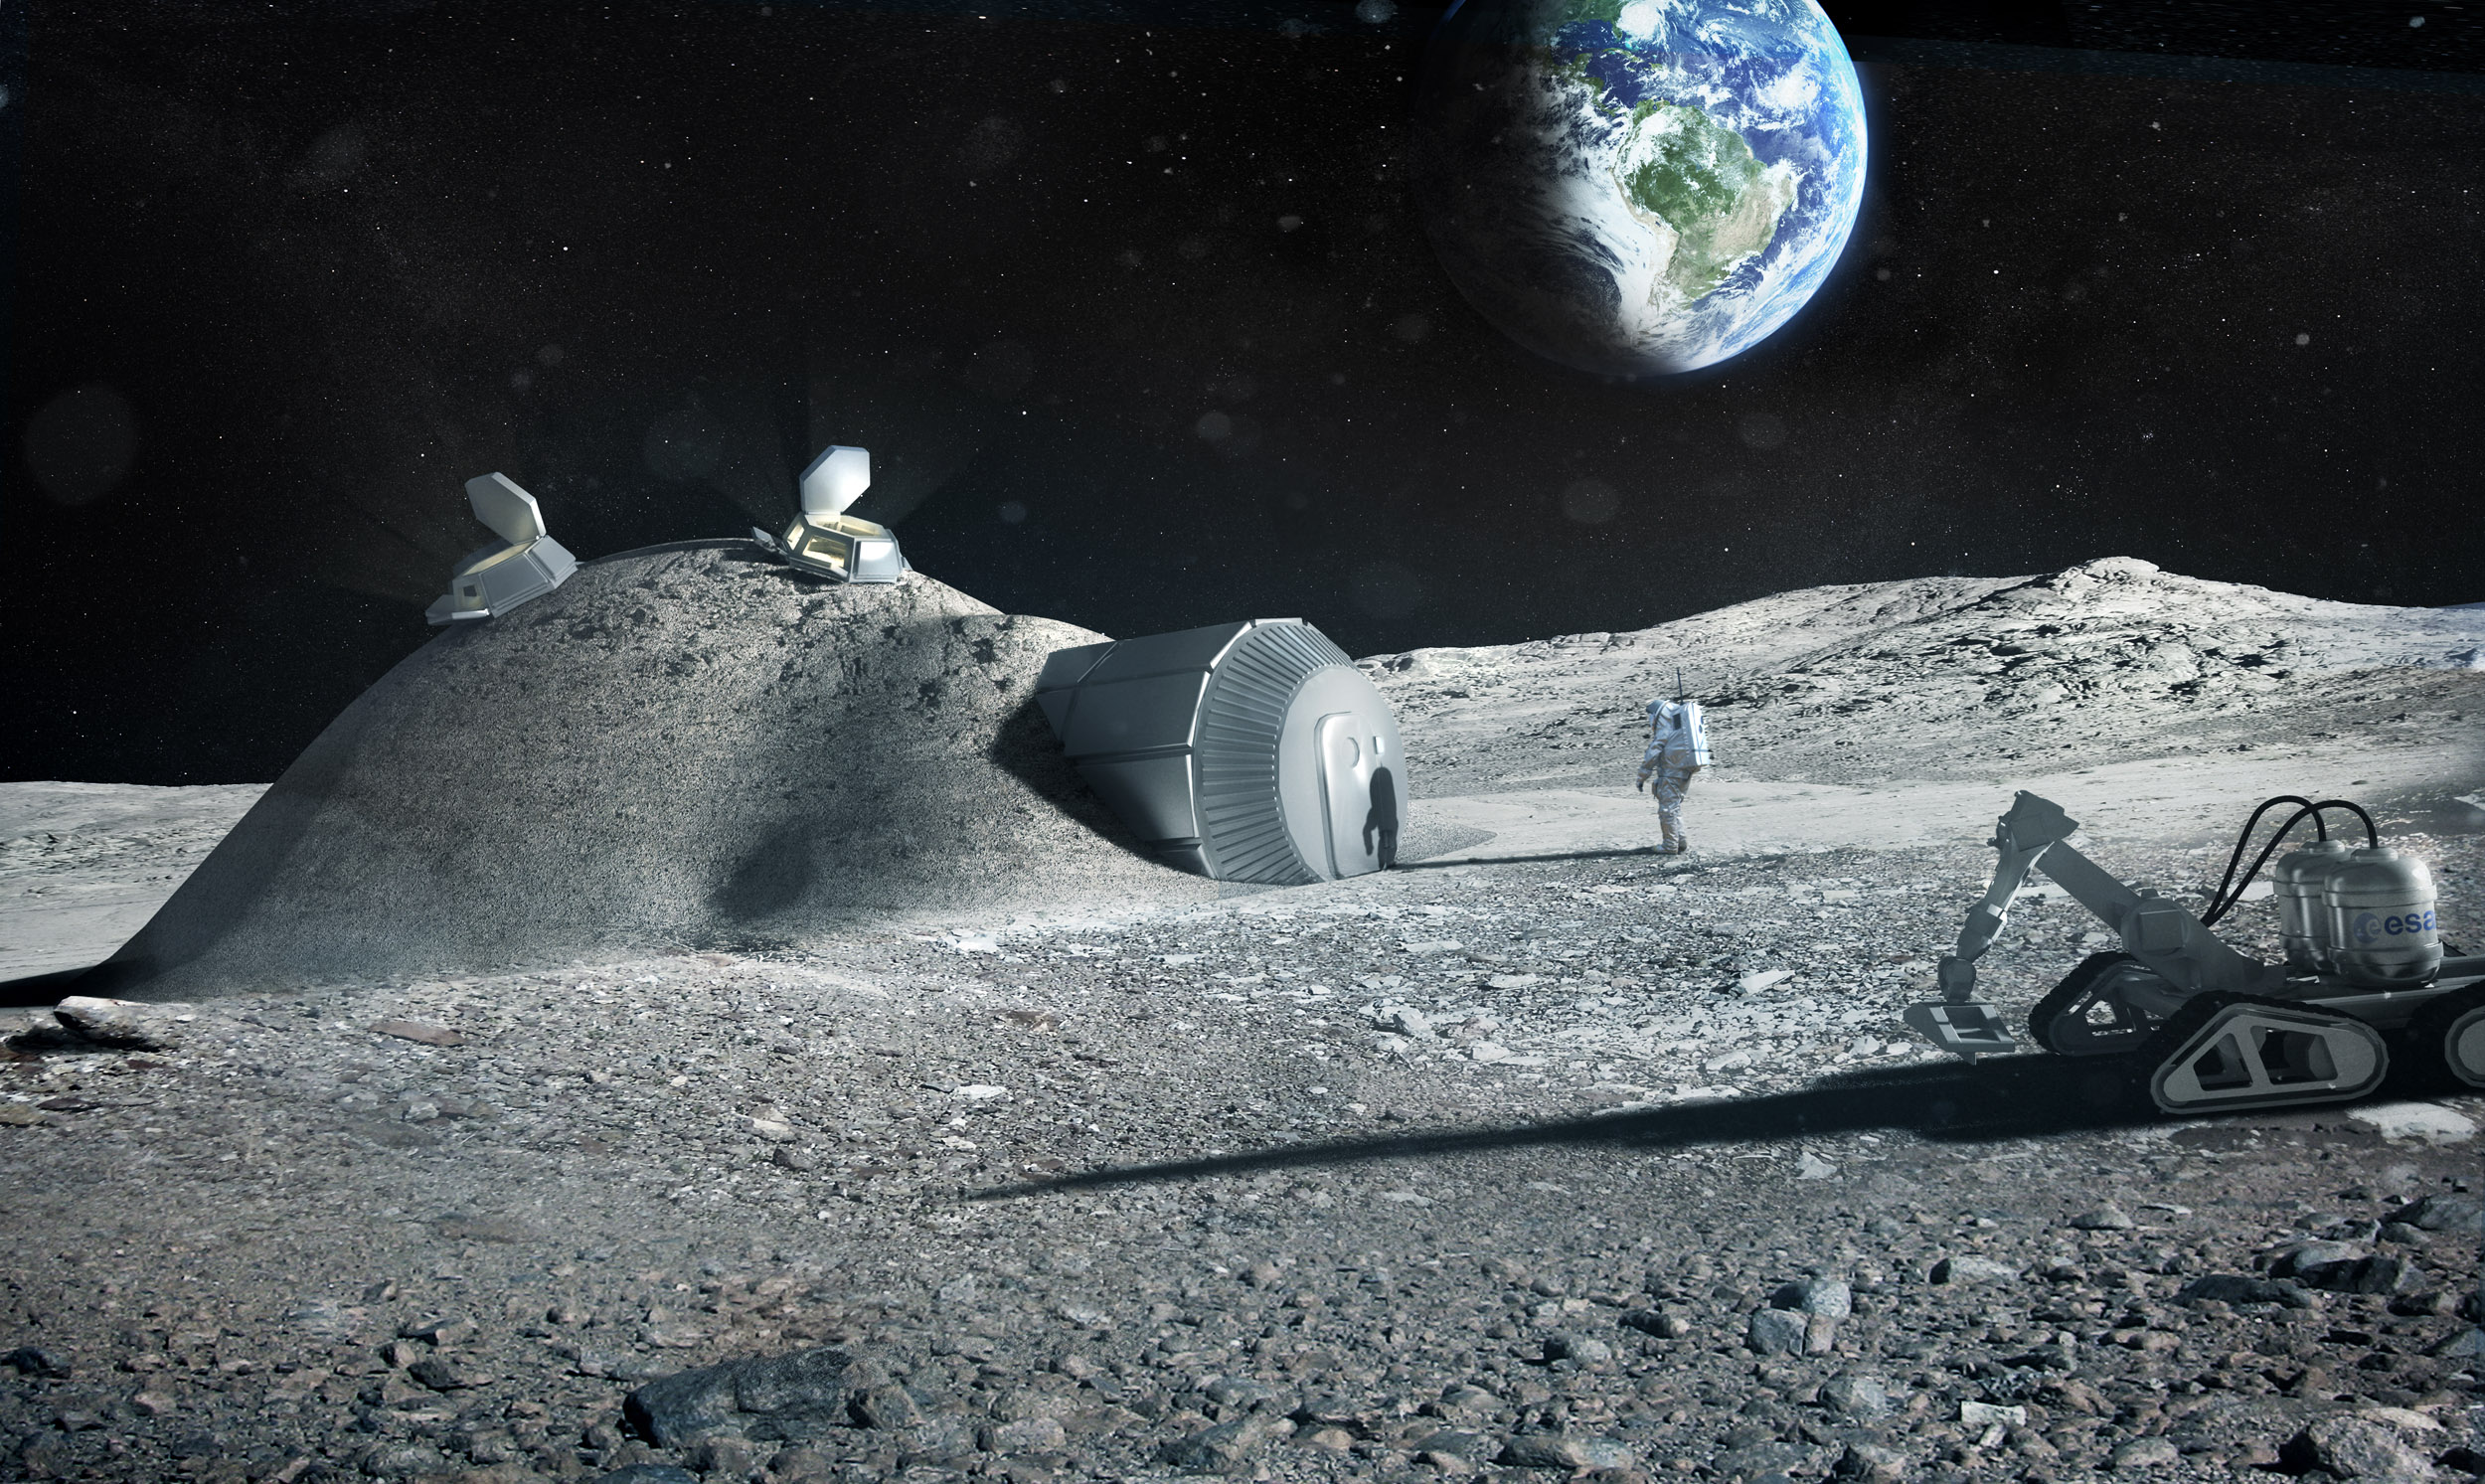 manned moon base